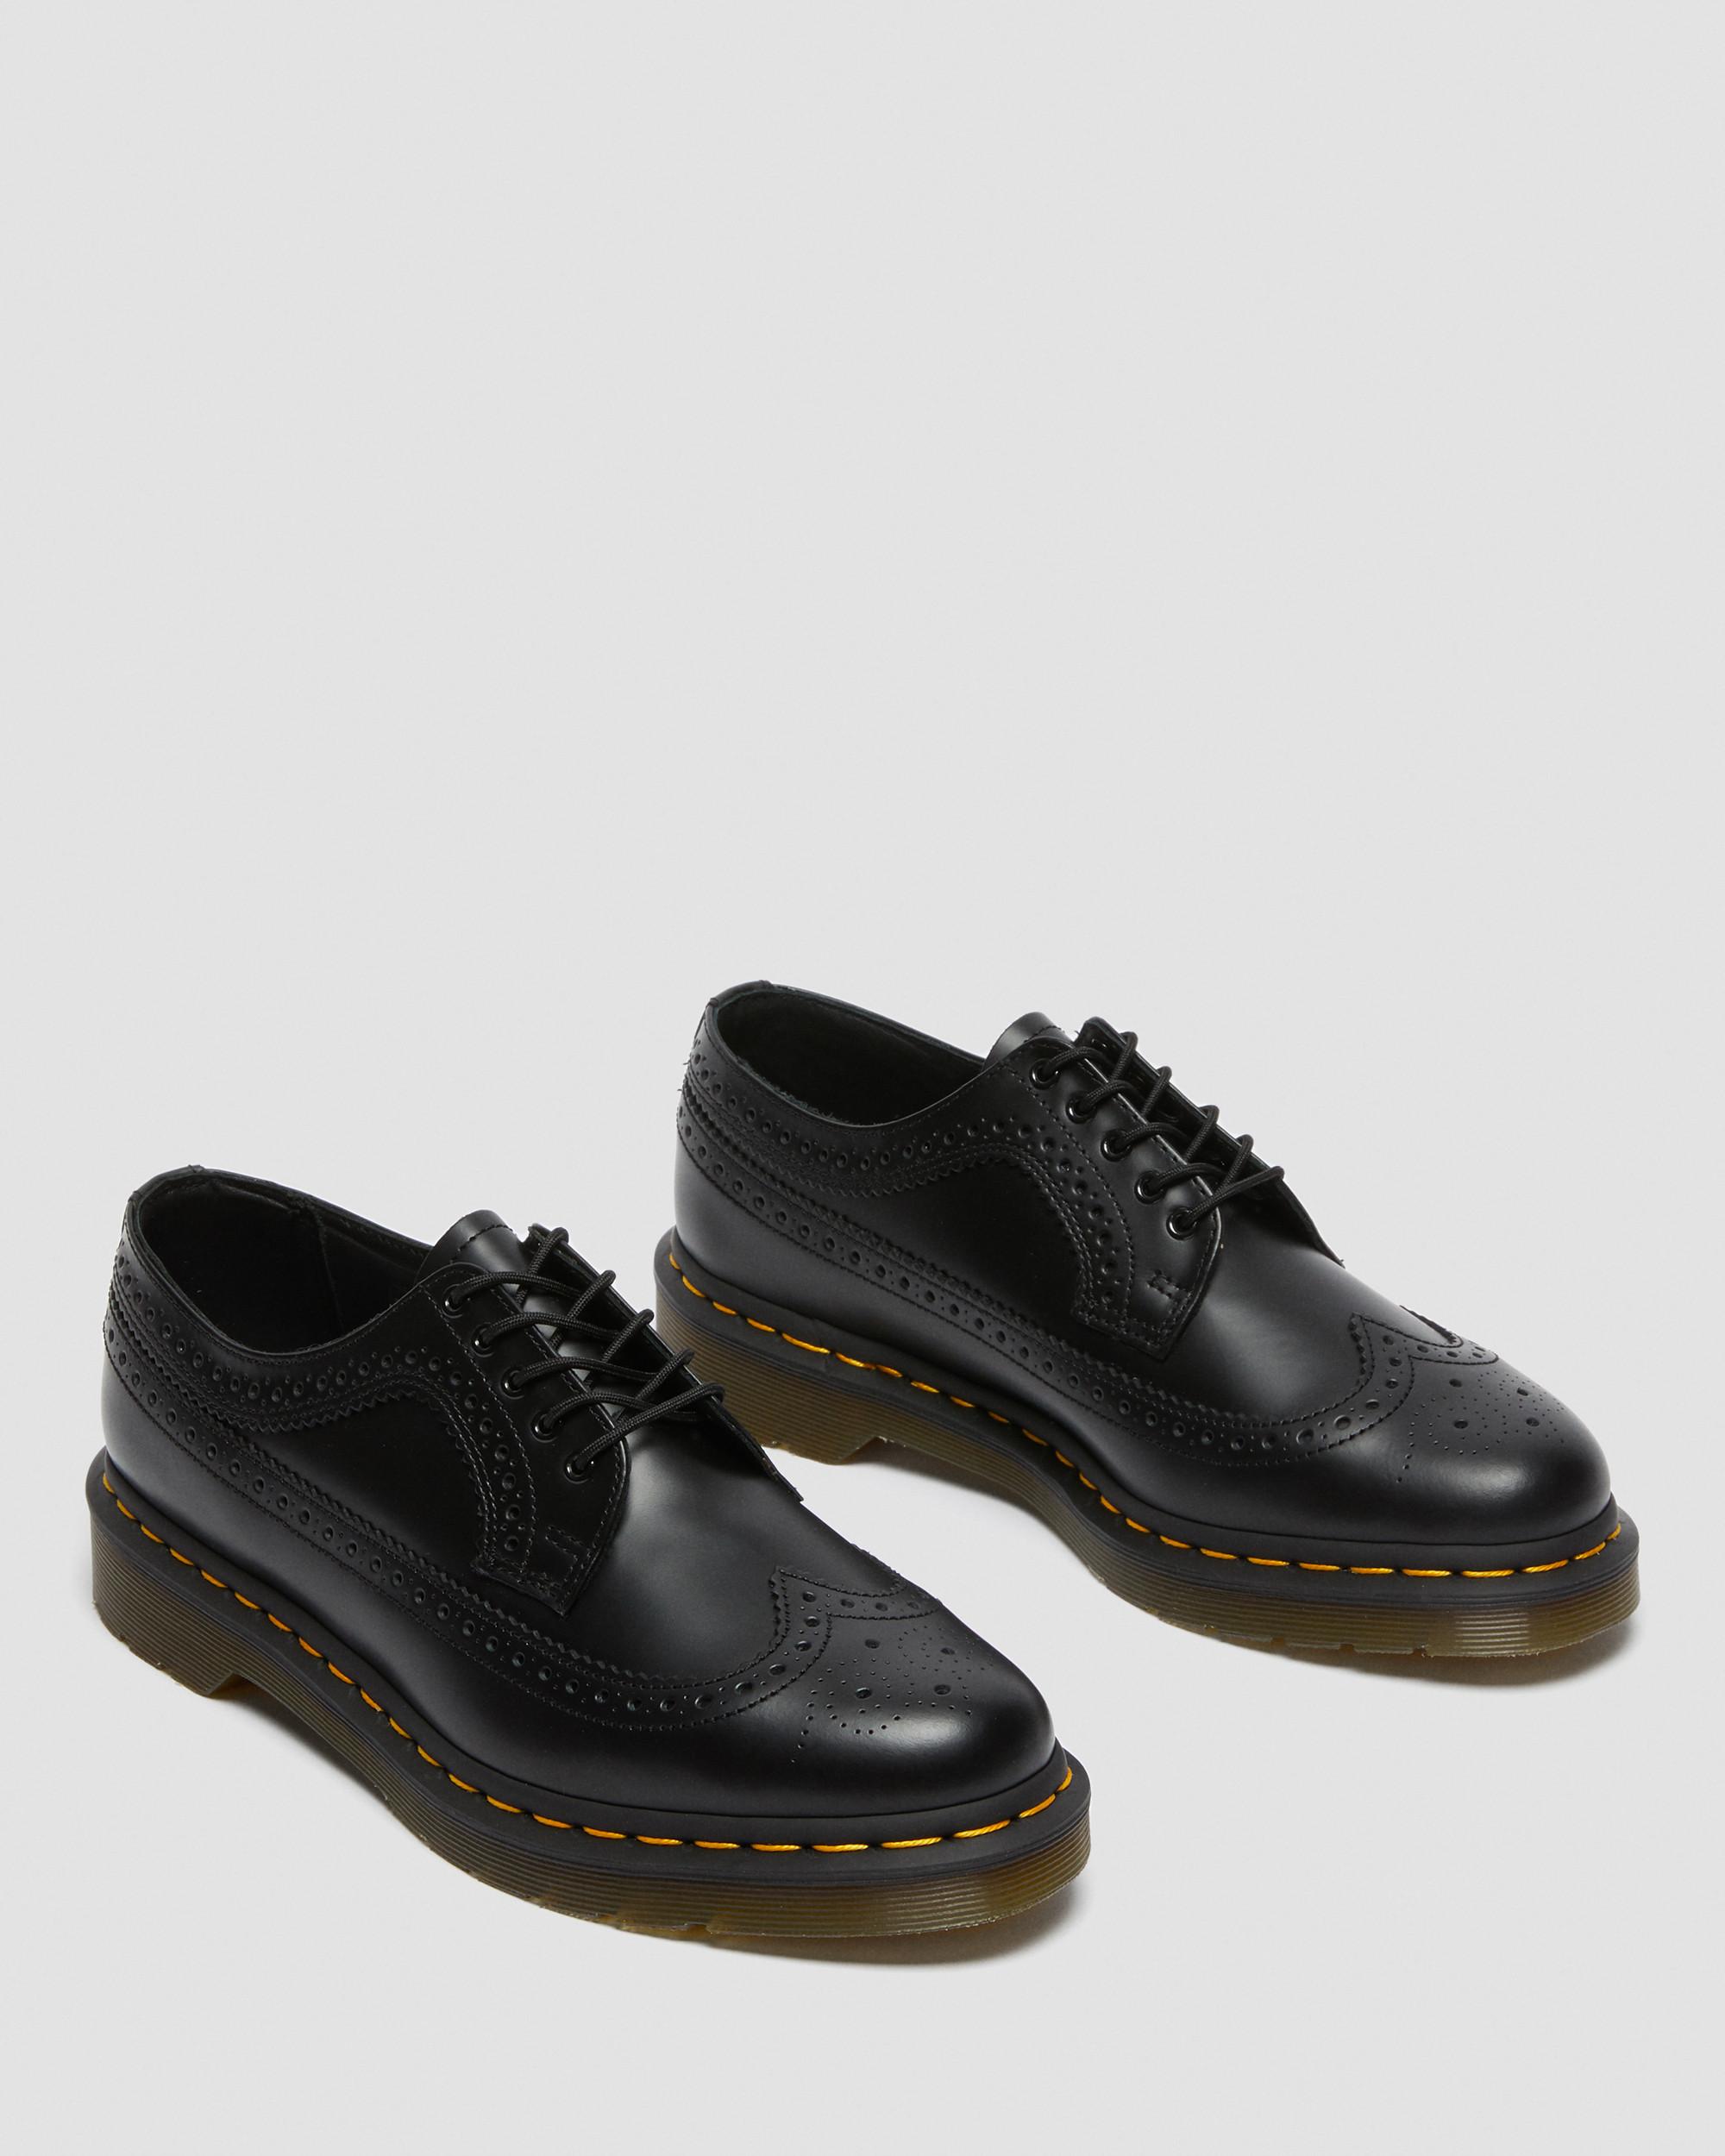 3989 Yellow Stitch Smooth Leather Brogue Shoes | Dr. Martens